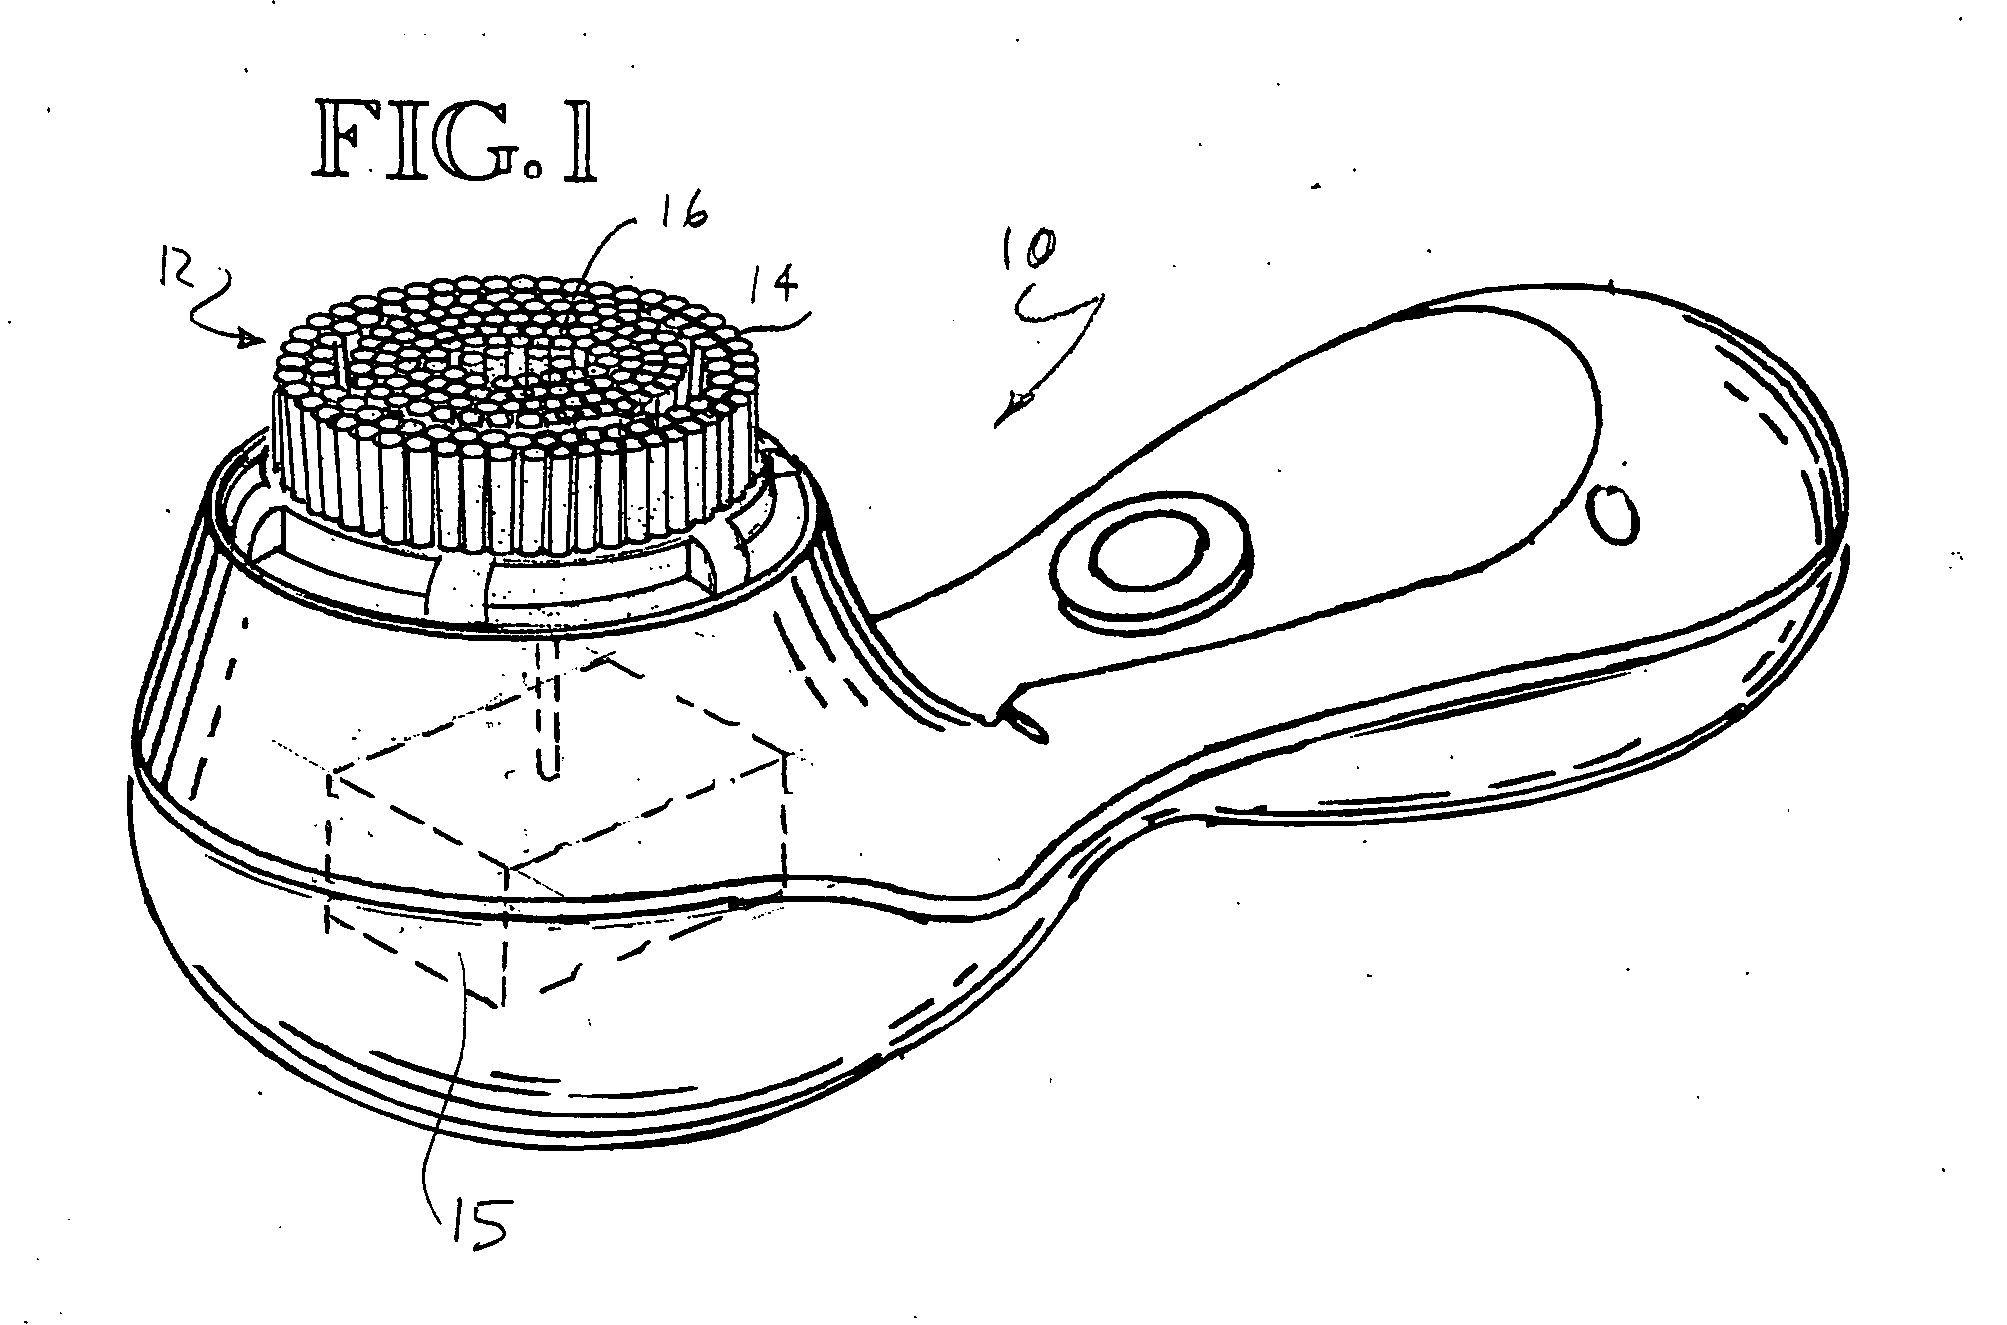 Brush configuration for a powered skin cleansing brush appliance